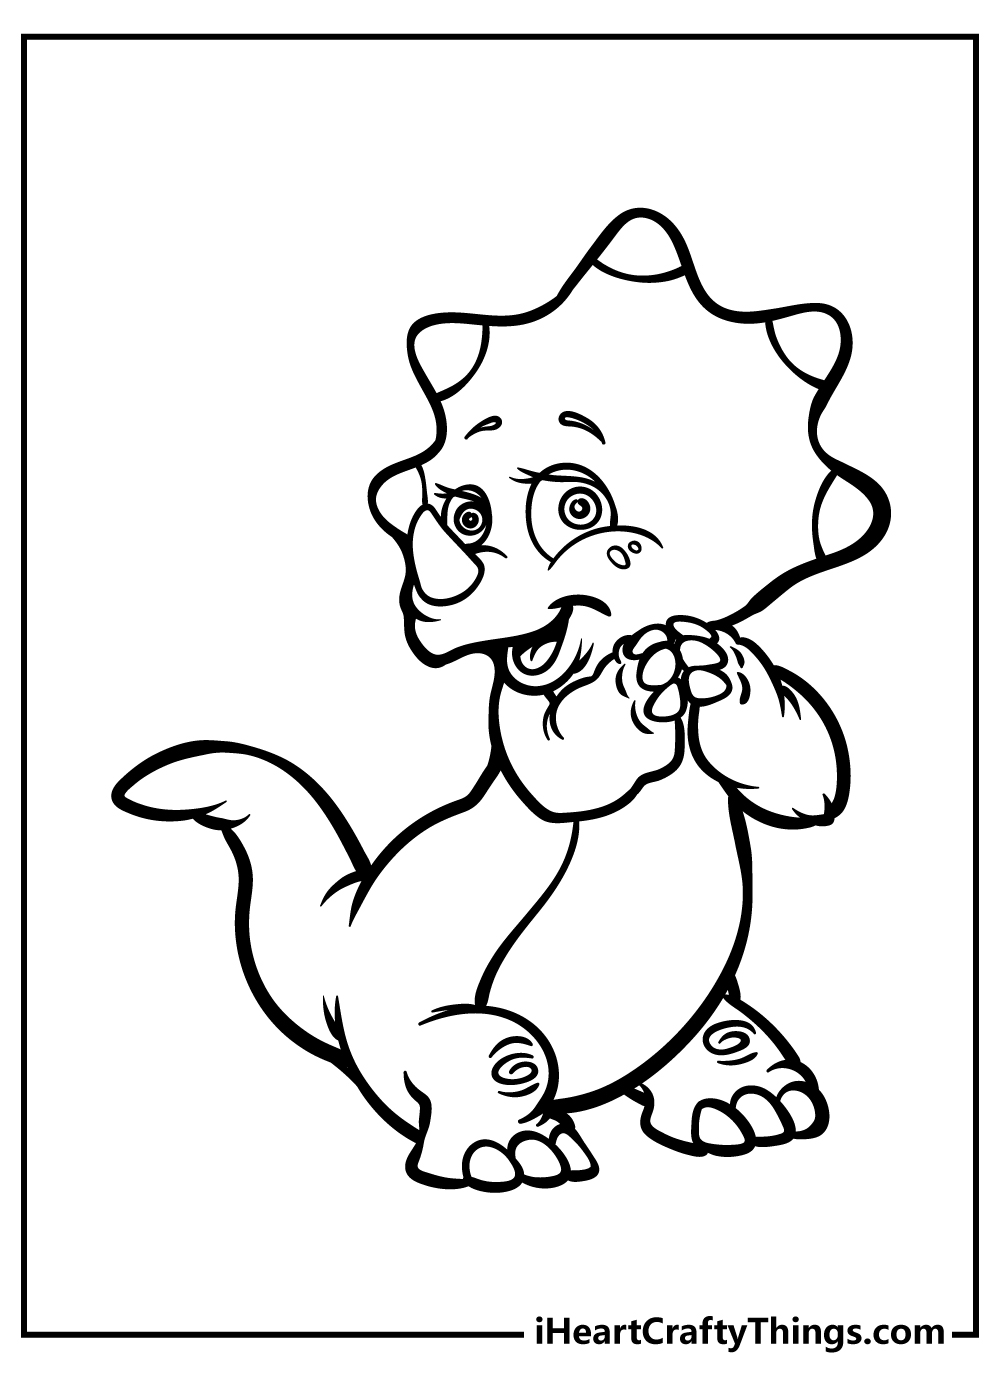 Baby Dinosaur Coloring Pages for adults free printable